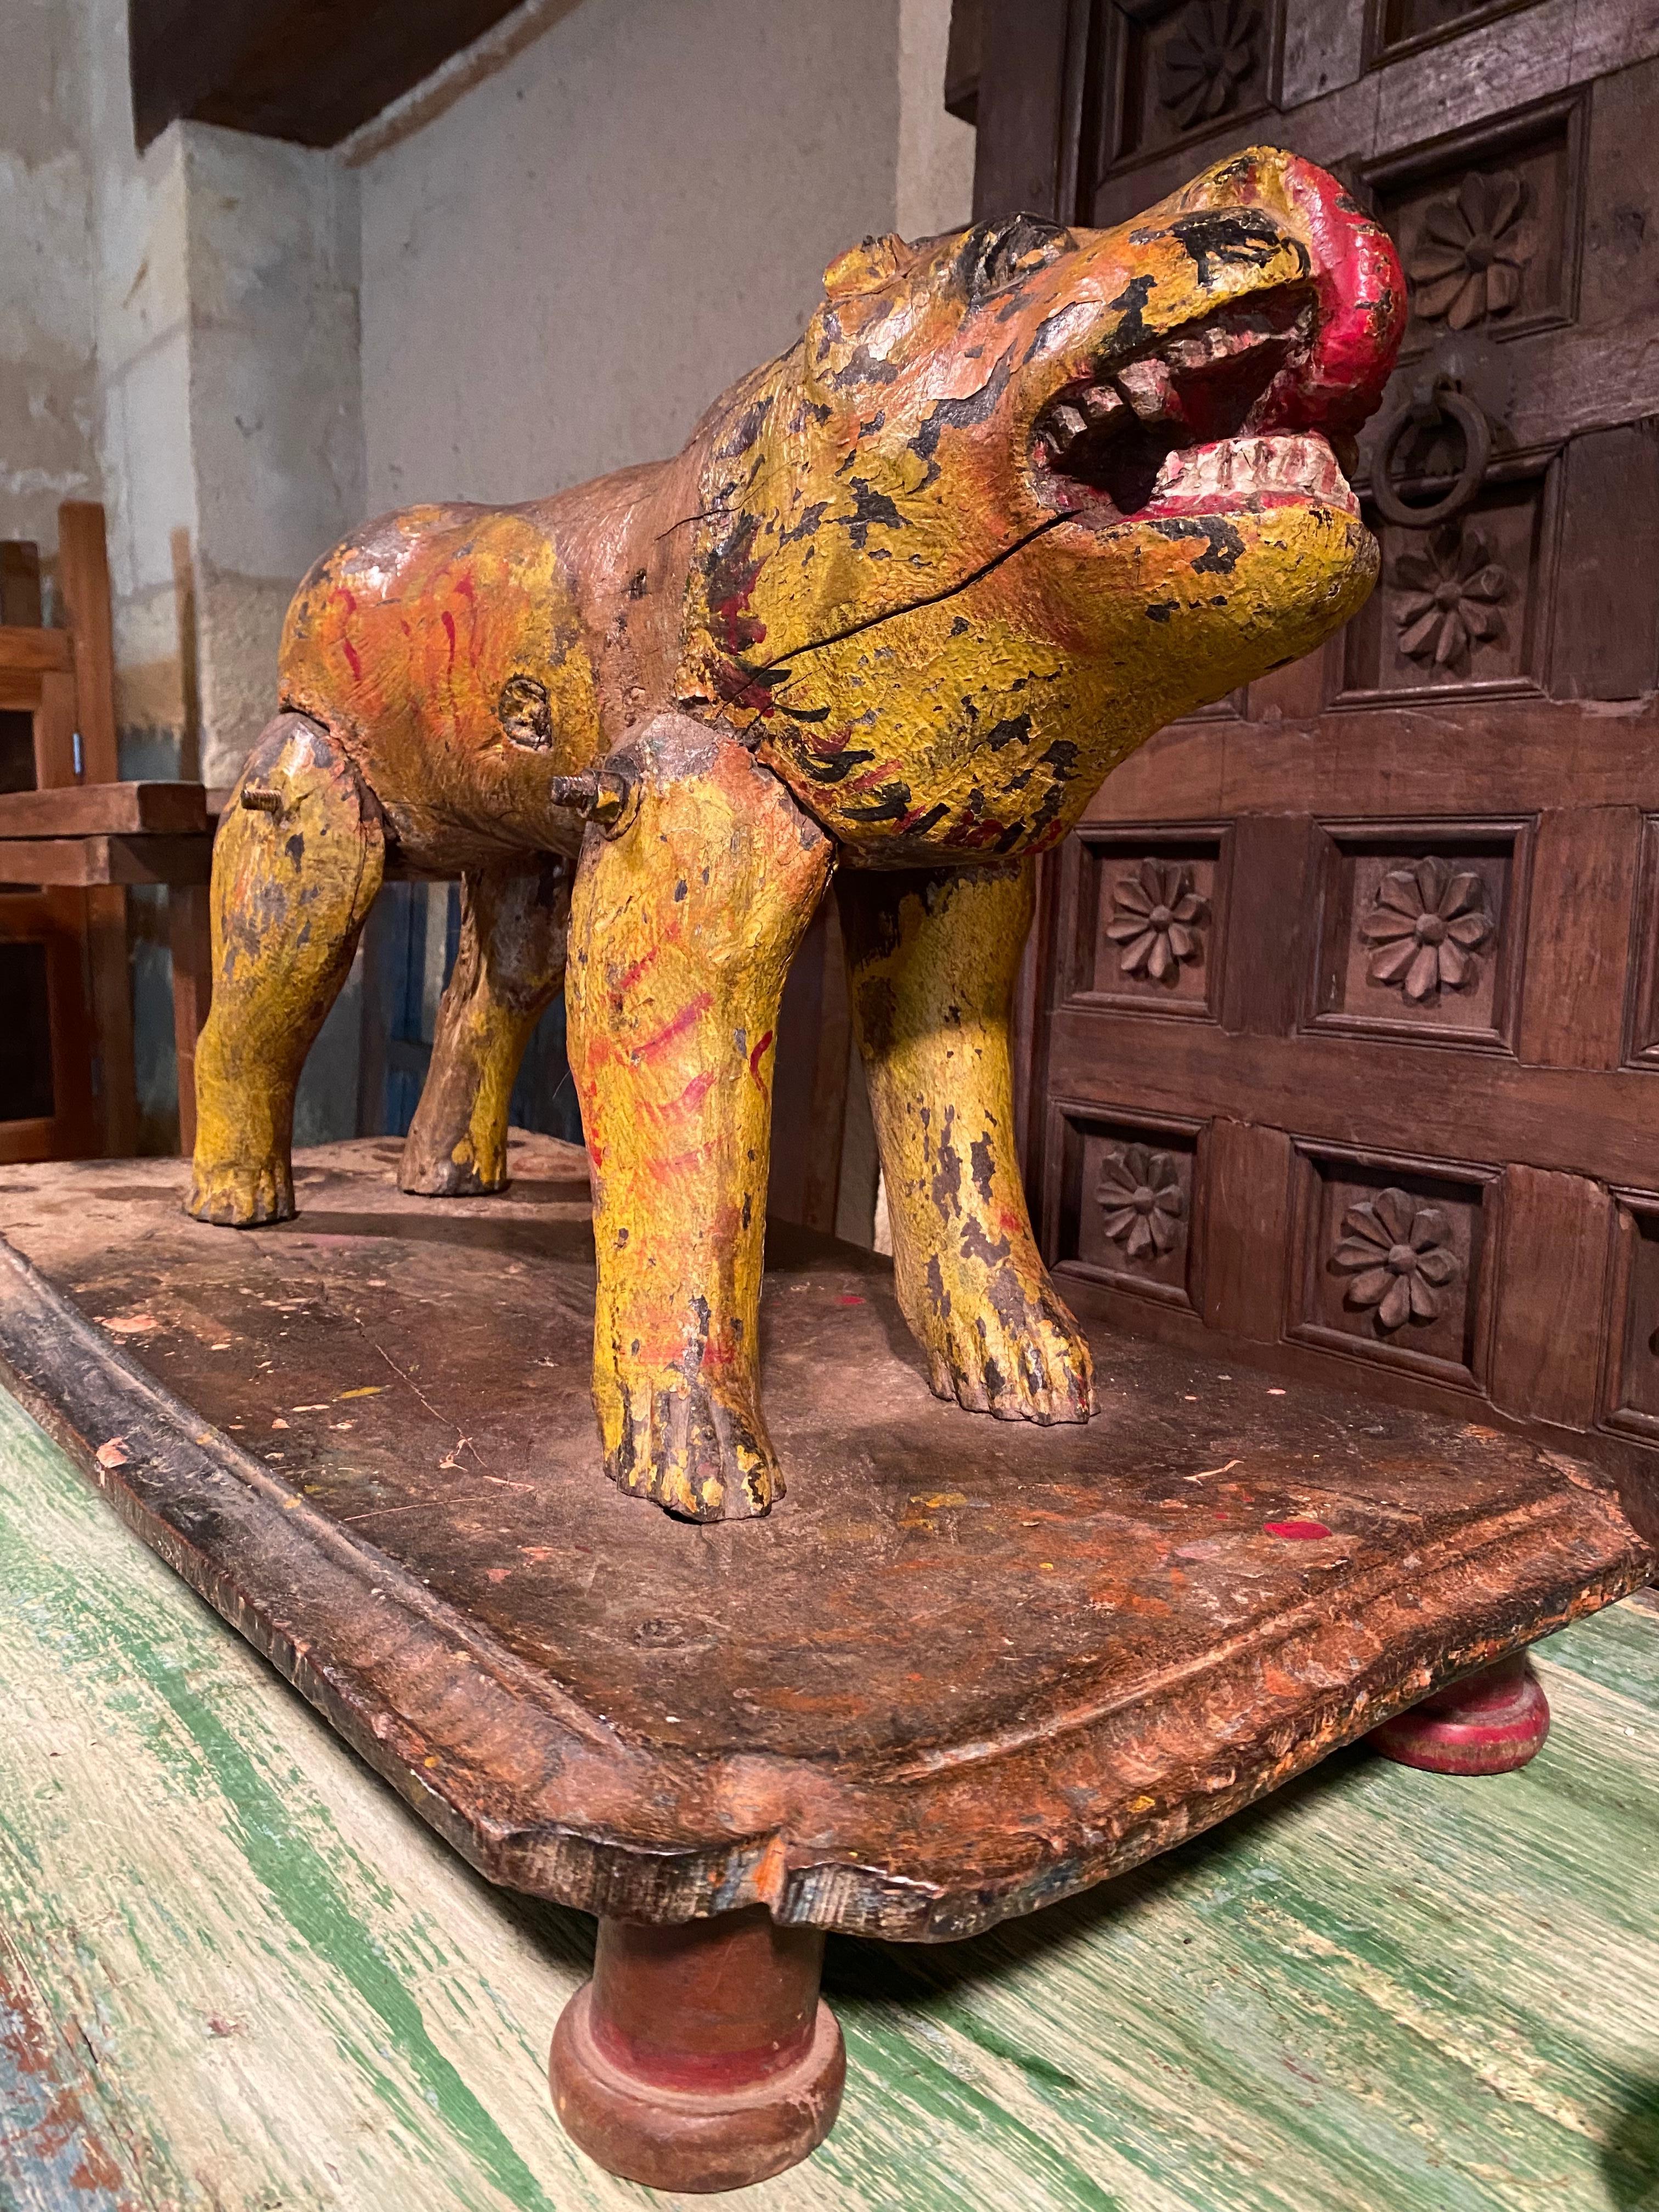 Folk art Hand painted sculpture of a roaring lion from an Indian processional chariot